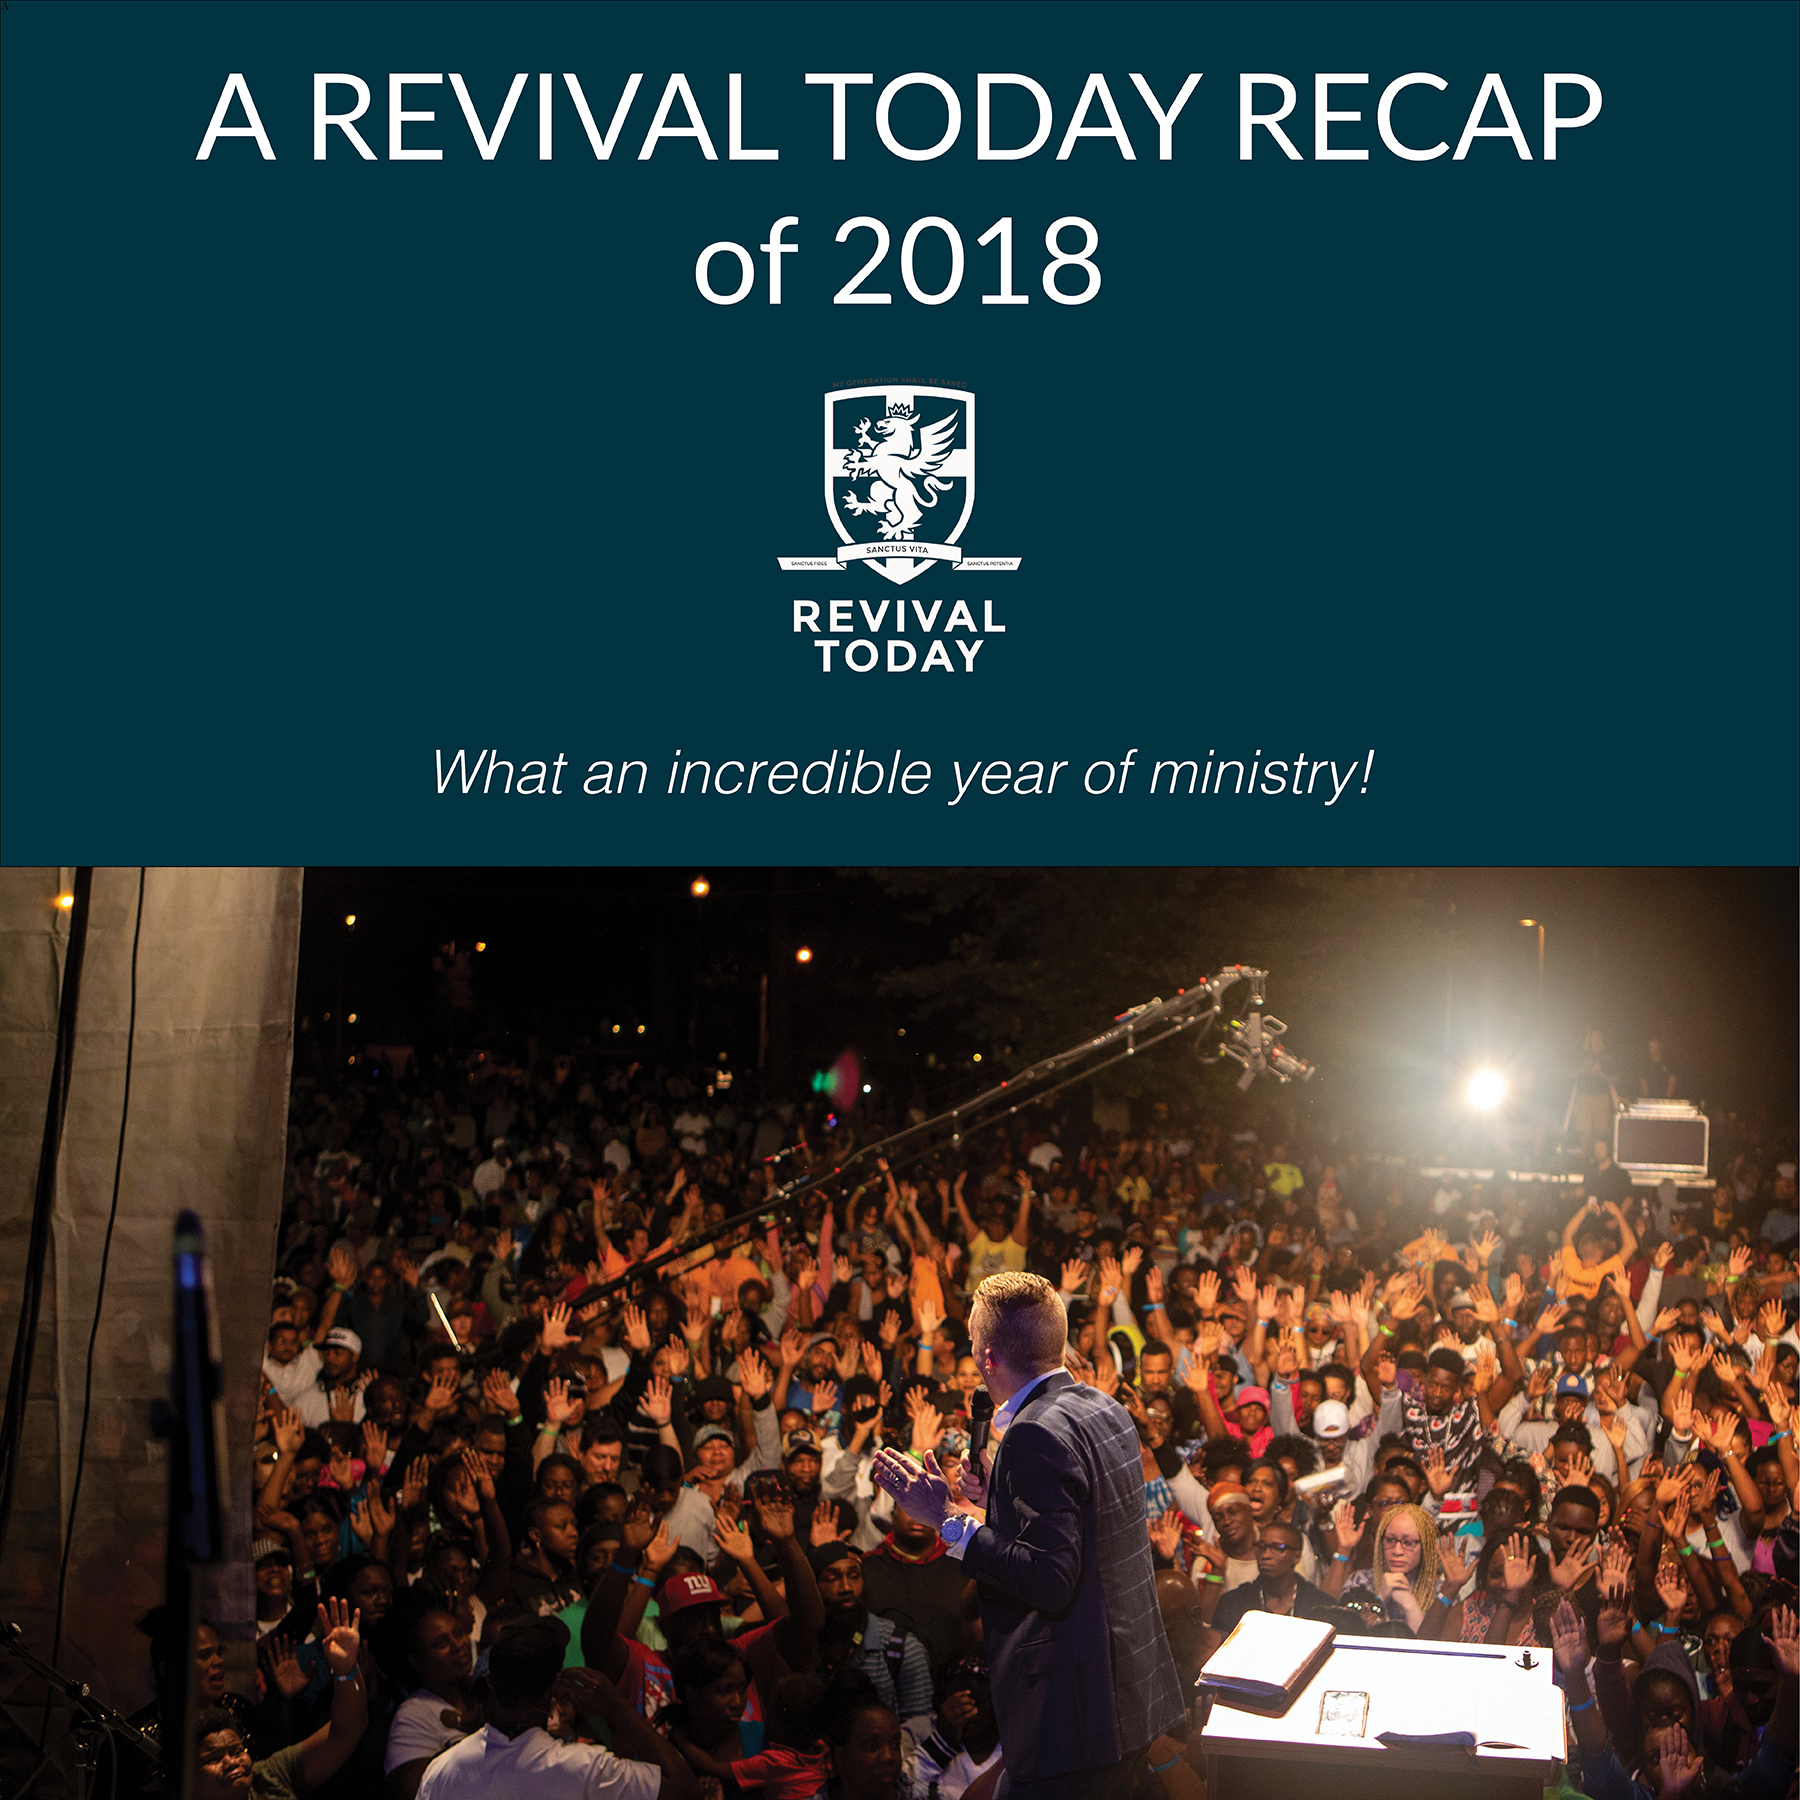 Revival Today Ministry in 2018